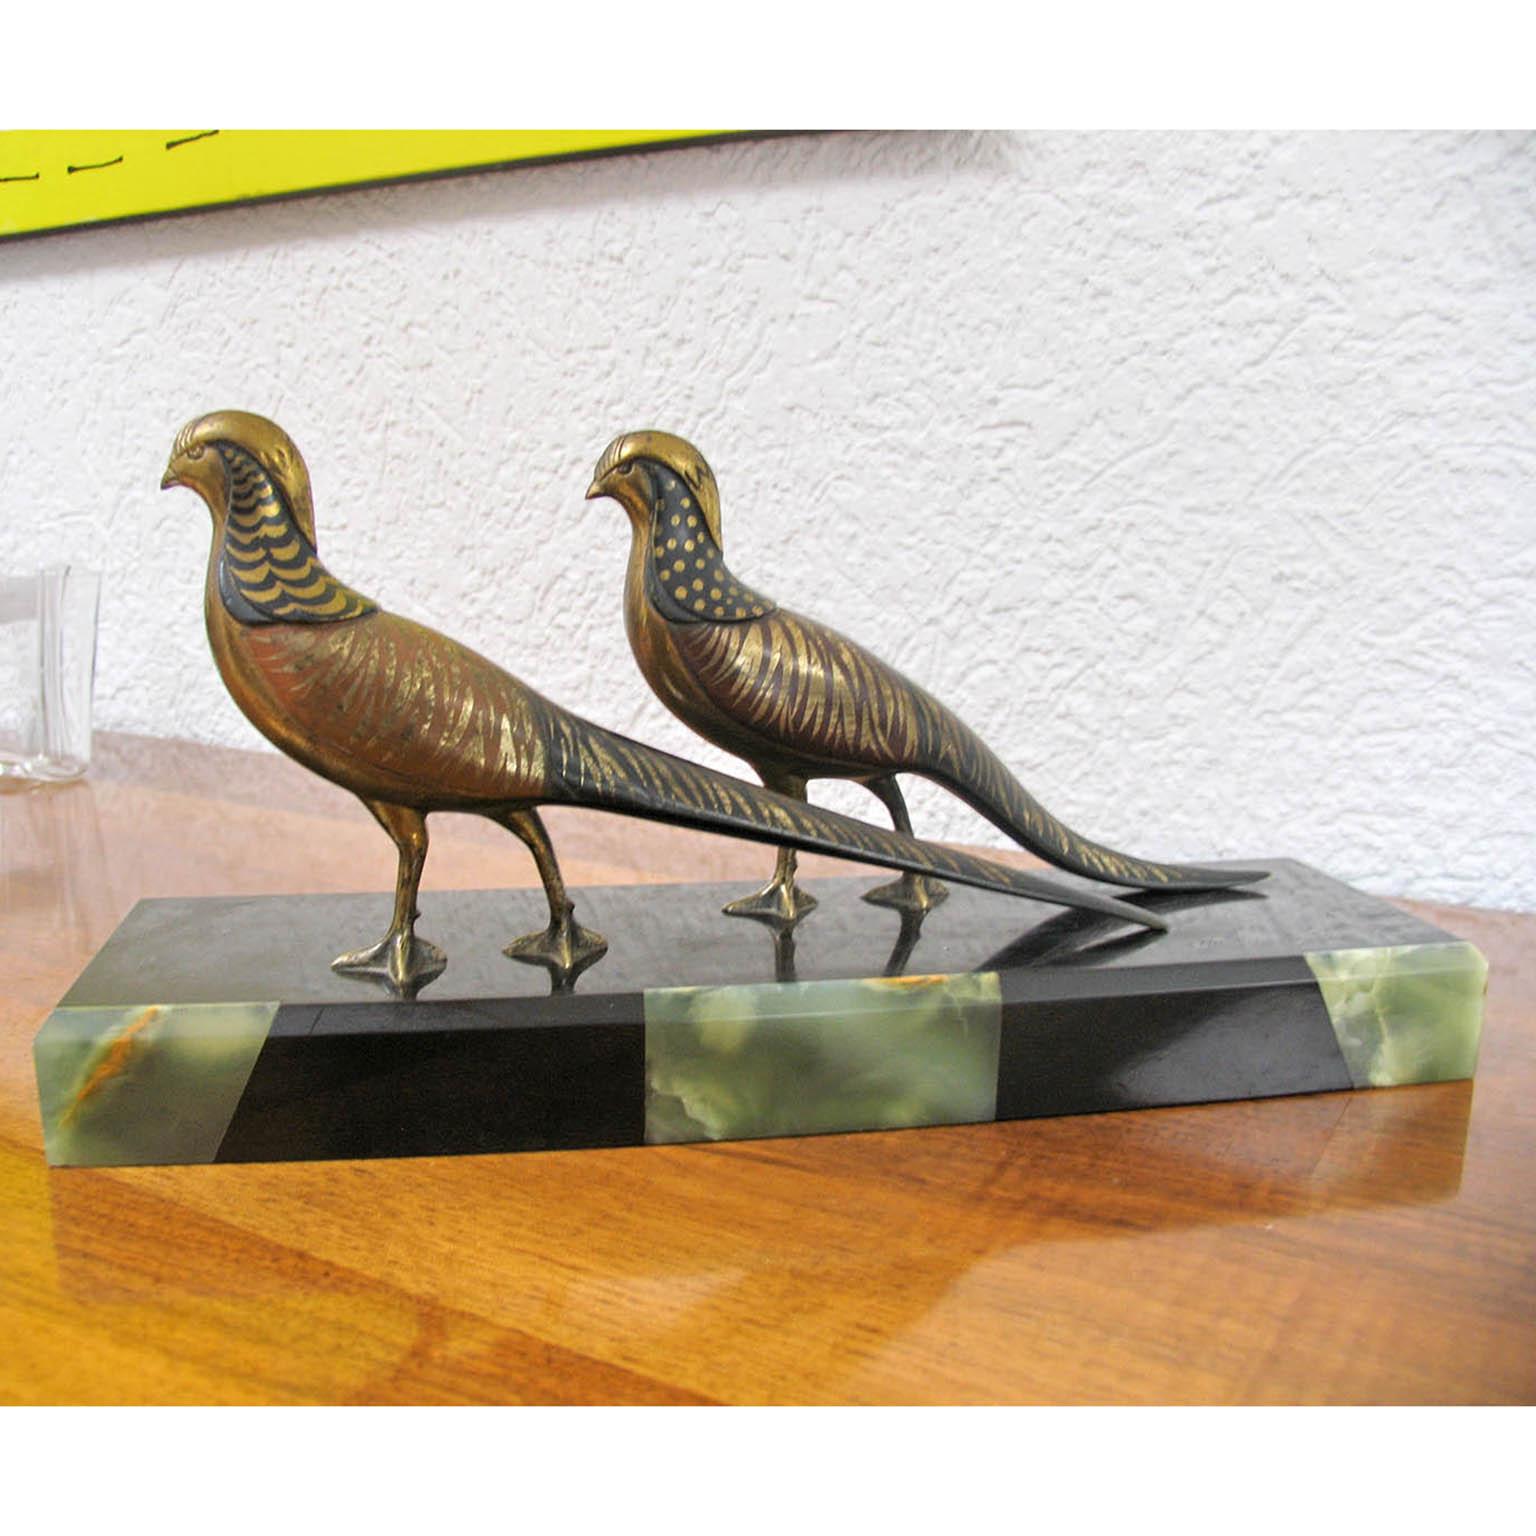 Early 20th Century Art Deco Pheasants Polychrome, Gilt Bronze, Marble and Onyx Base by M. Secondo